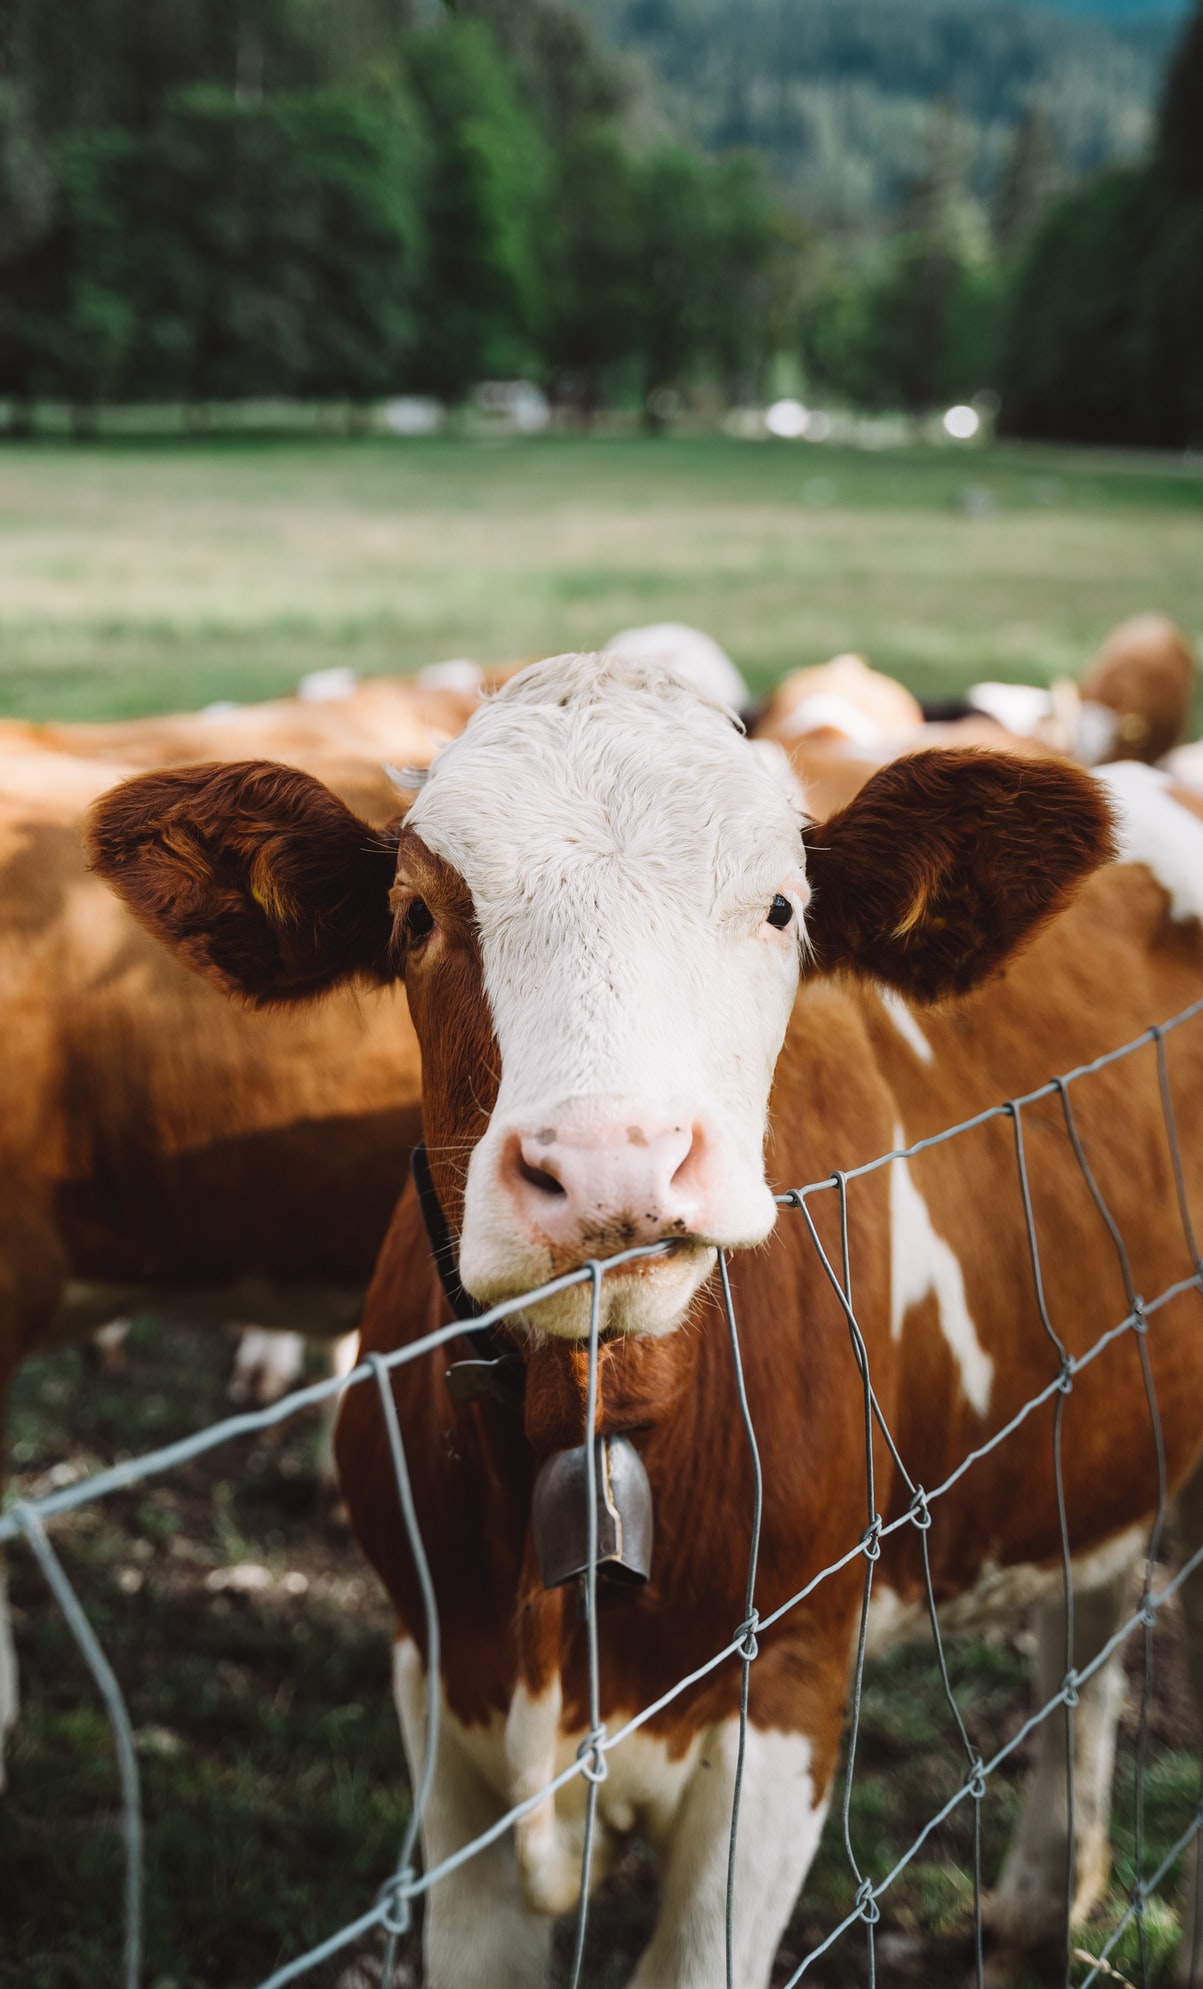 Of the 70 billion animals farmed annually around the world, approximately 50 billion of them are factory farmed. Clean meat has the potential to end the suffering of billions of farm animals every year.